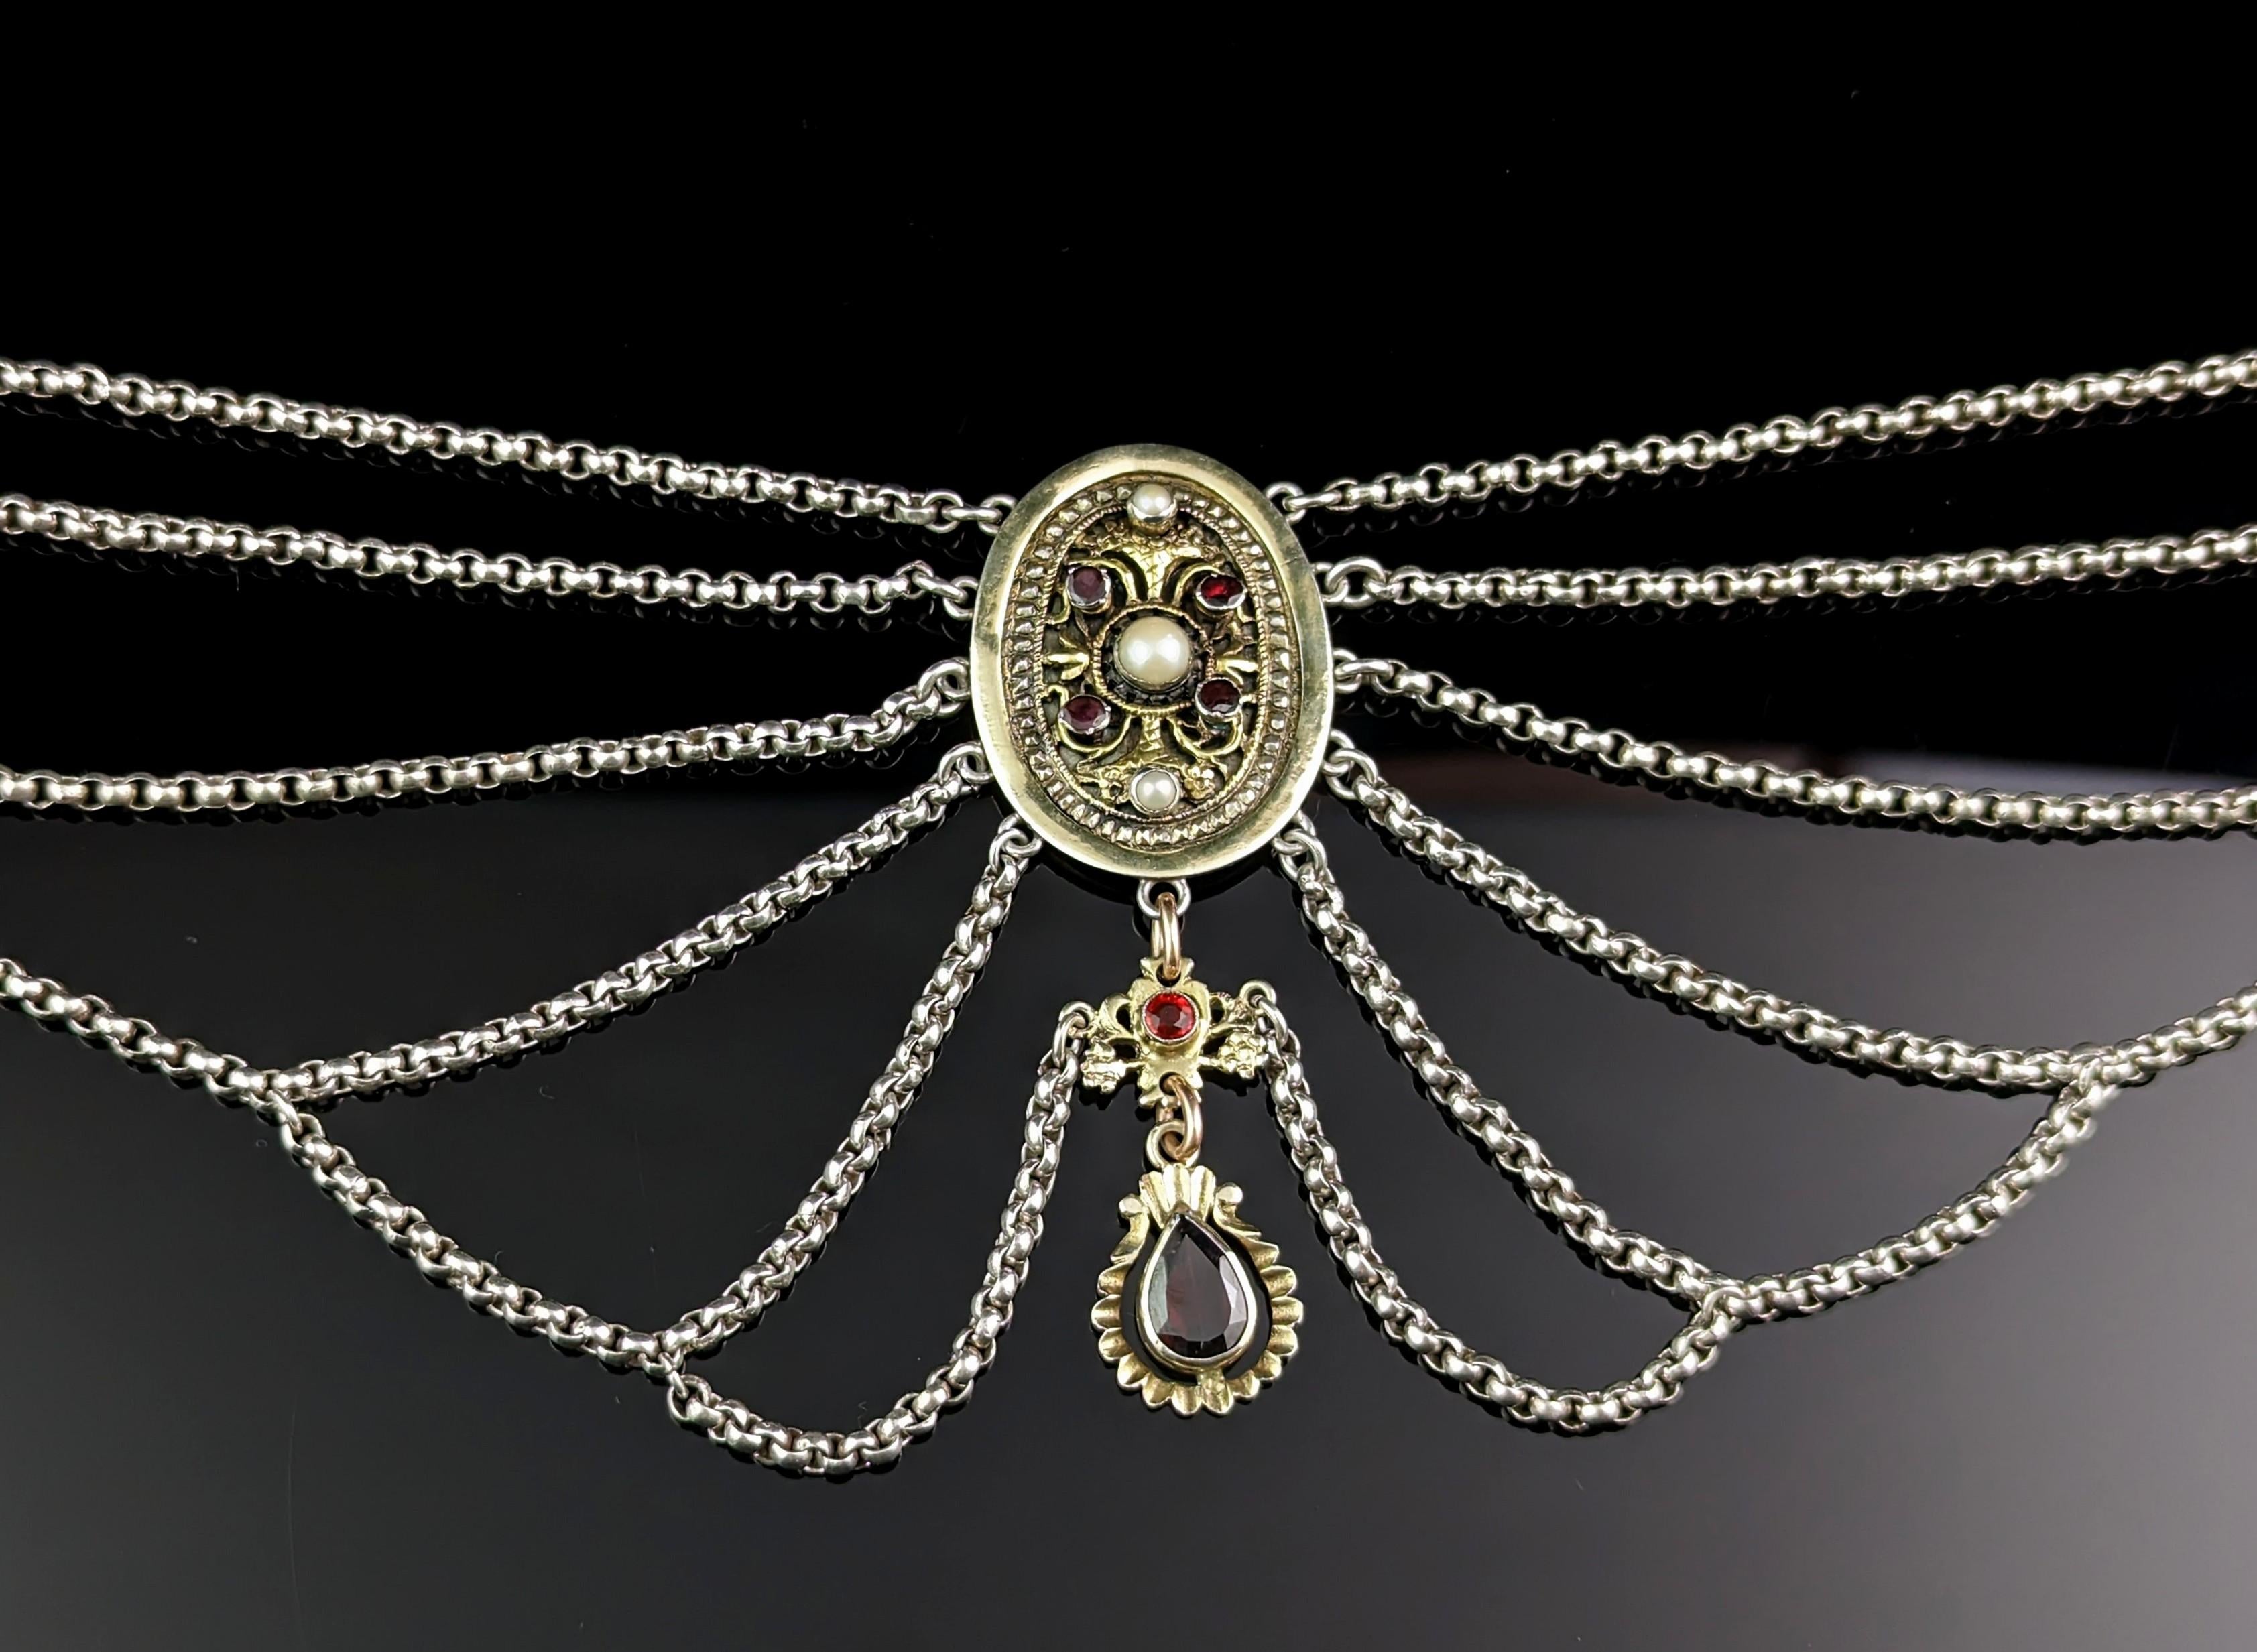 If you are a fan or collector of antique Austro-Hungarian jewellery then this one is for you!

This is an impeccable late 19th century Austro-Hungarian festoon or swag necklace, it has multiple rows of silver rolo link chain leading to the pendant